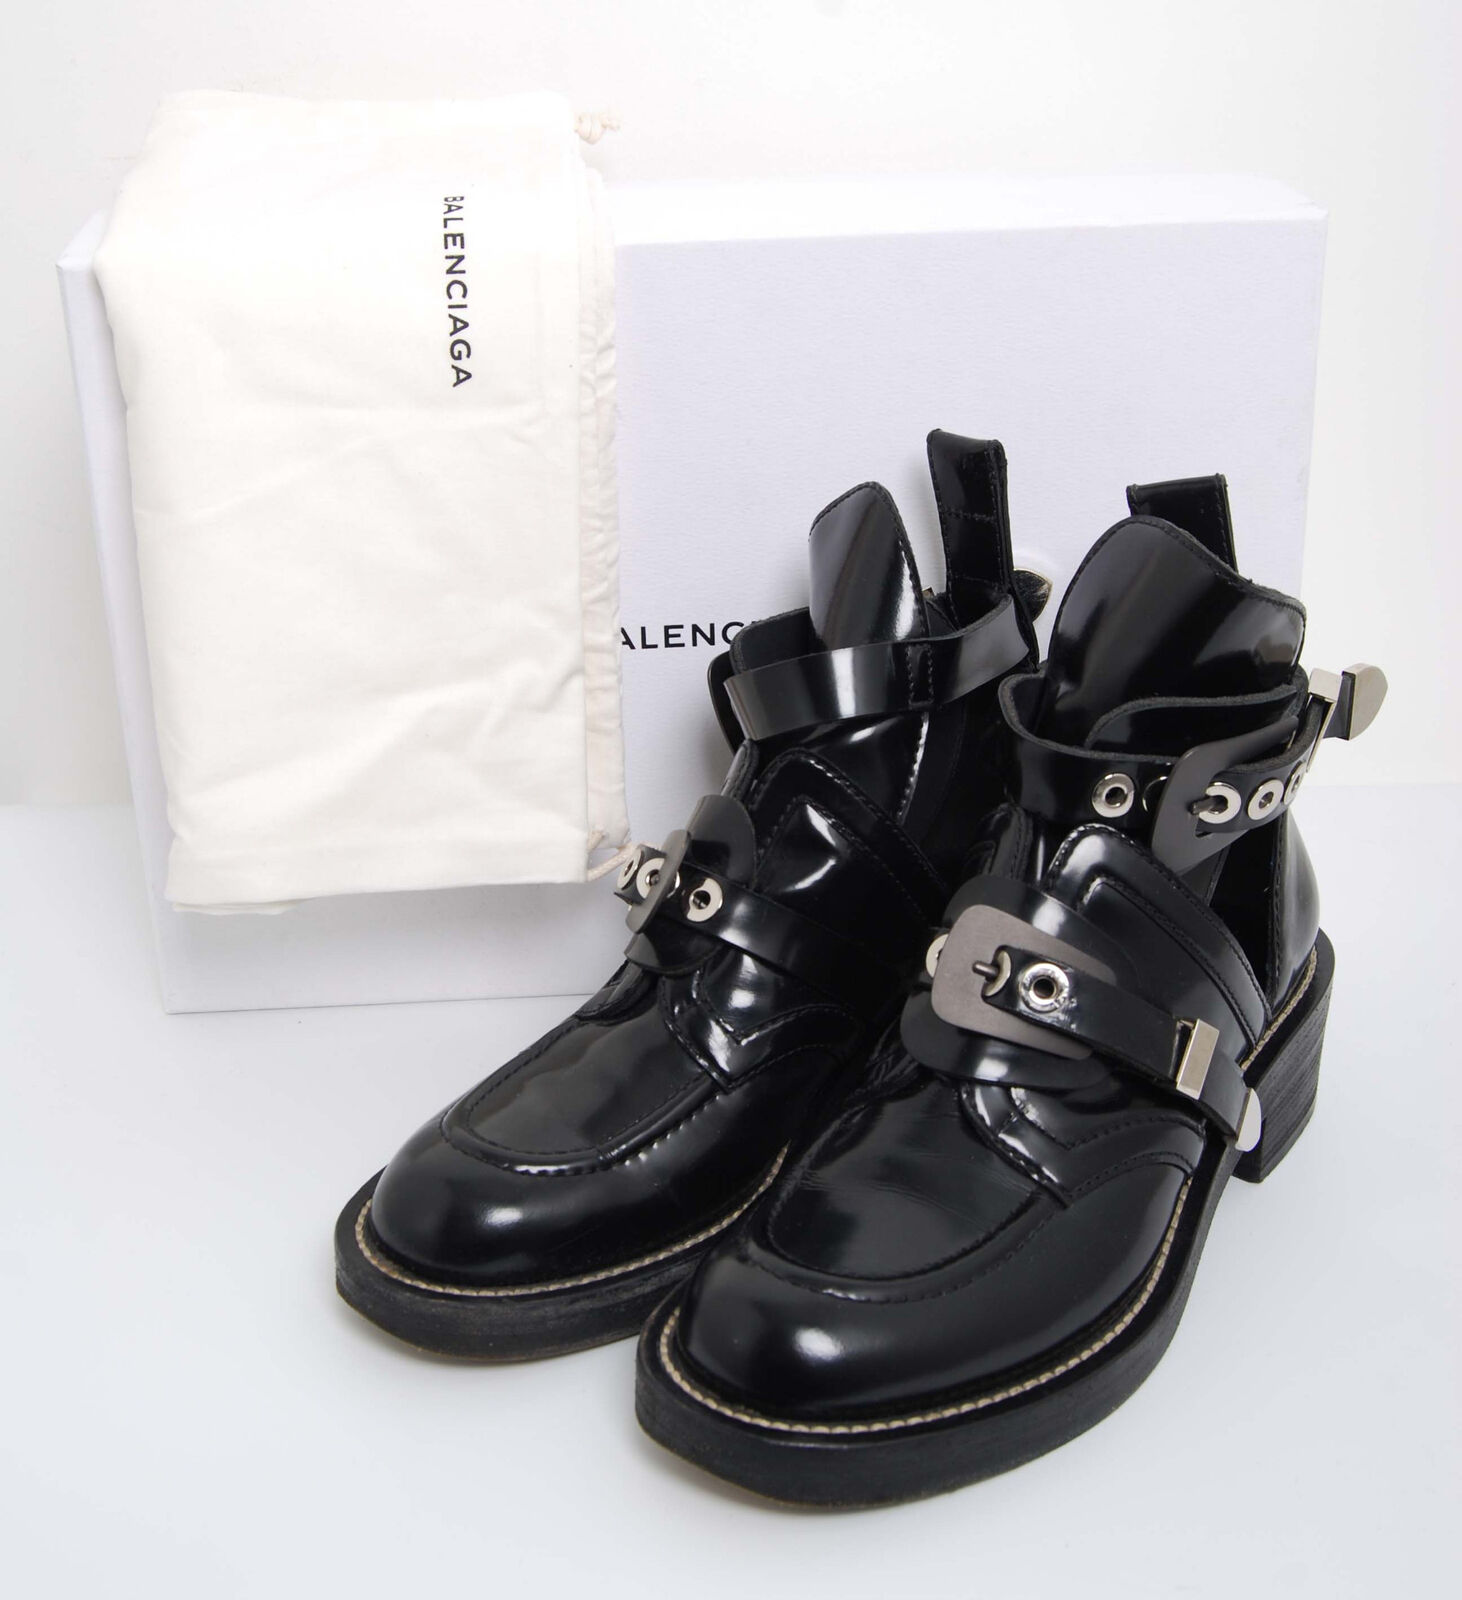 Balenciaga Women Black Ankle Boots Leather Strapp… - image 6